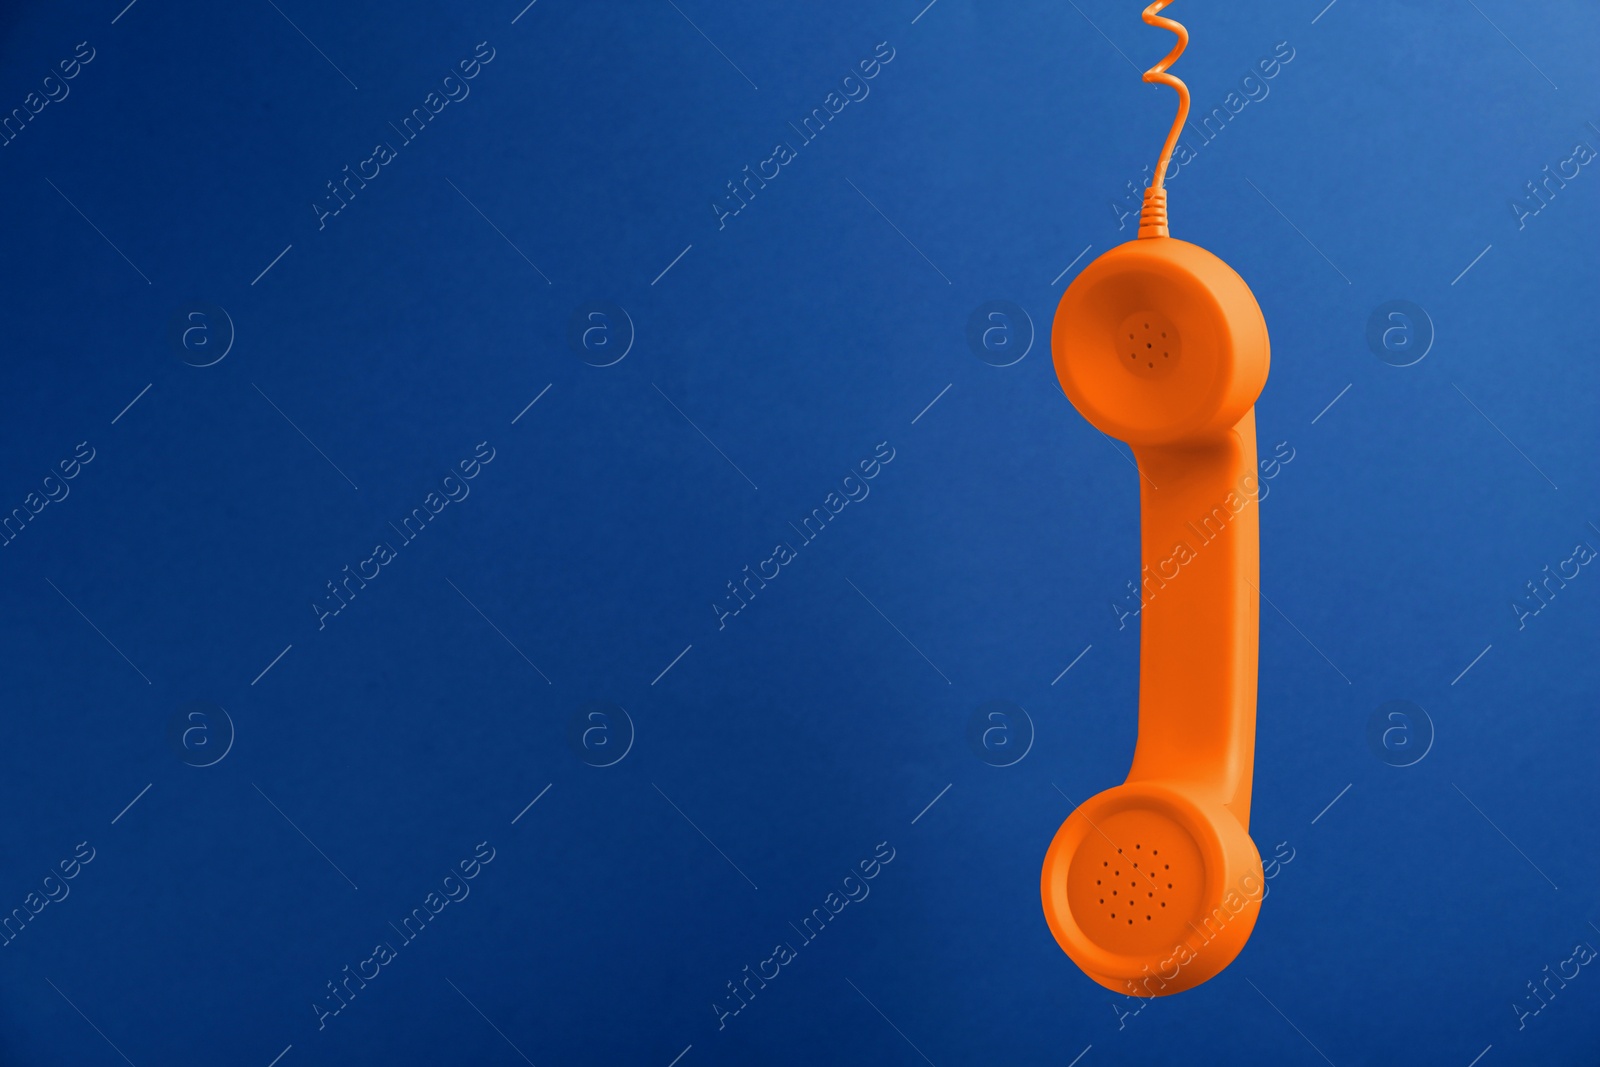 Image of Orange telephone handset hanging on blue background. Space for text